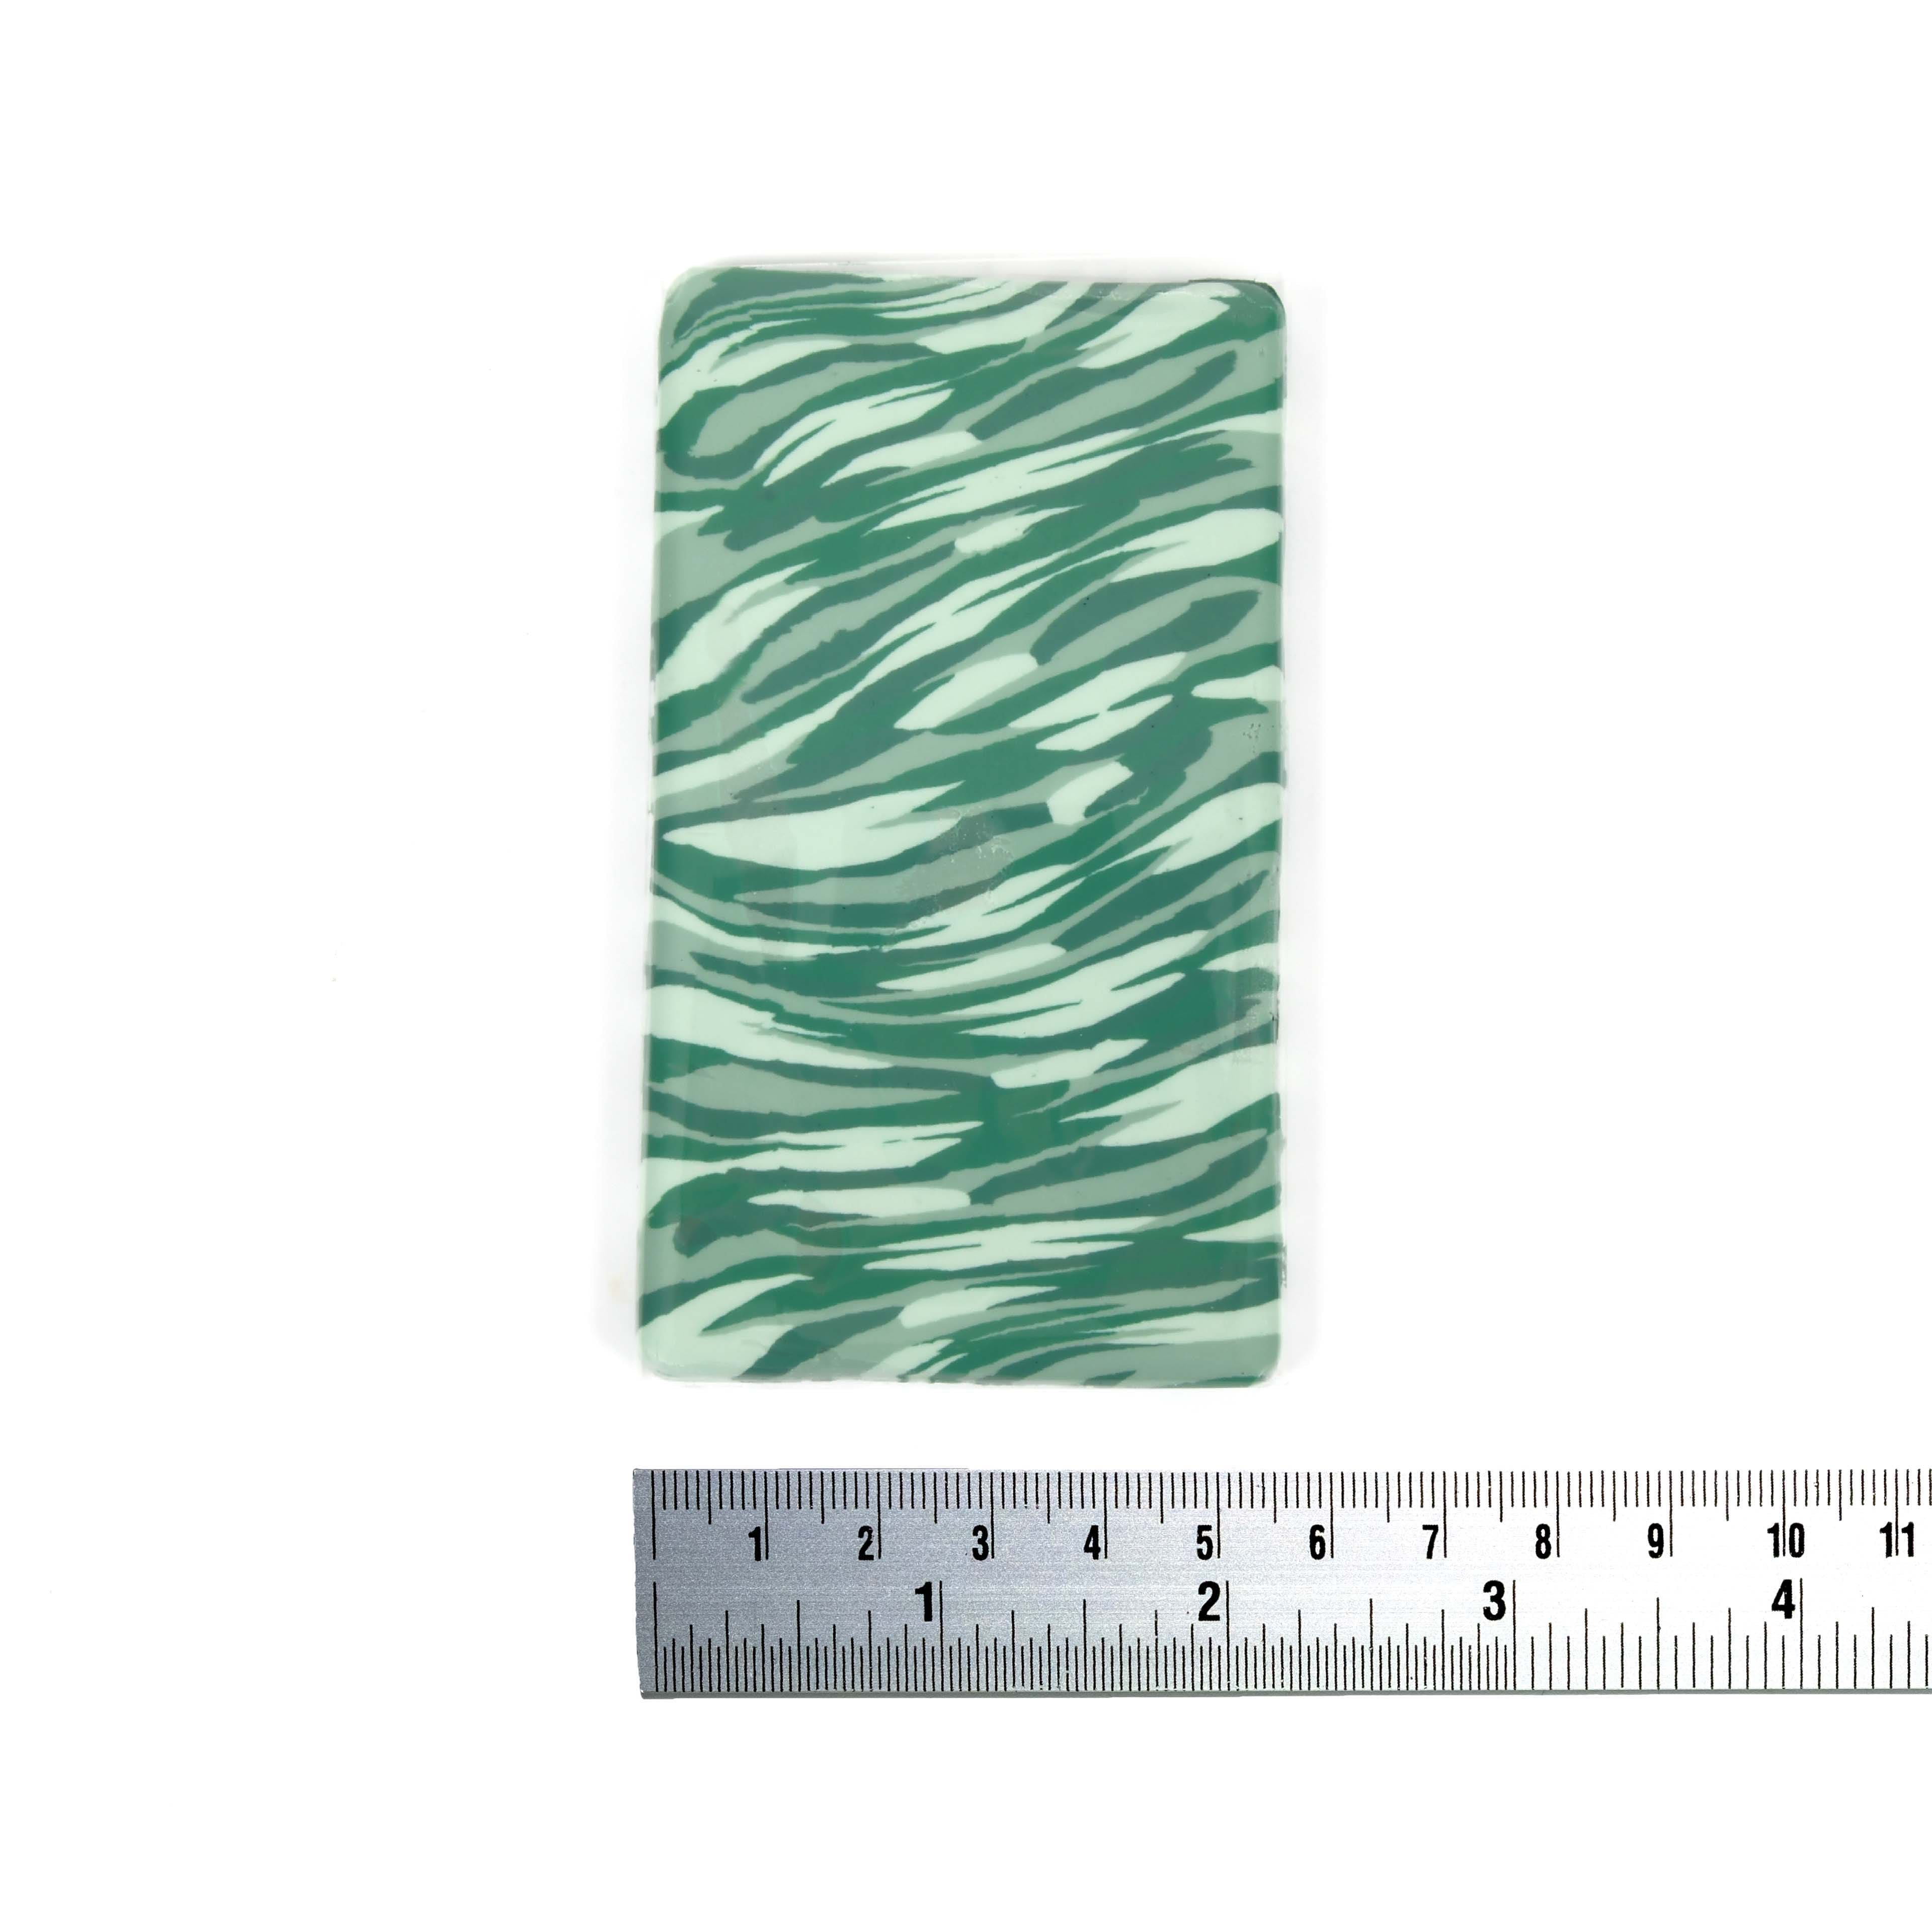 Green Stripes Oven Bake Polymer Clay by Bead Landing™